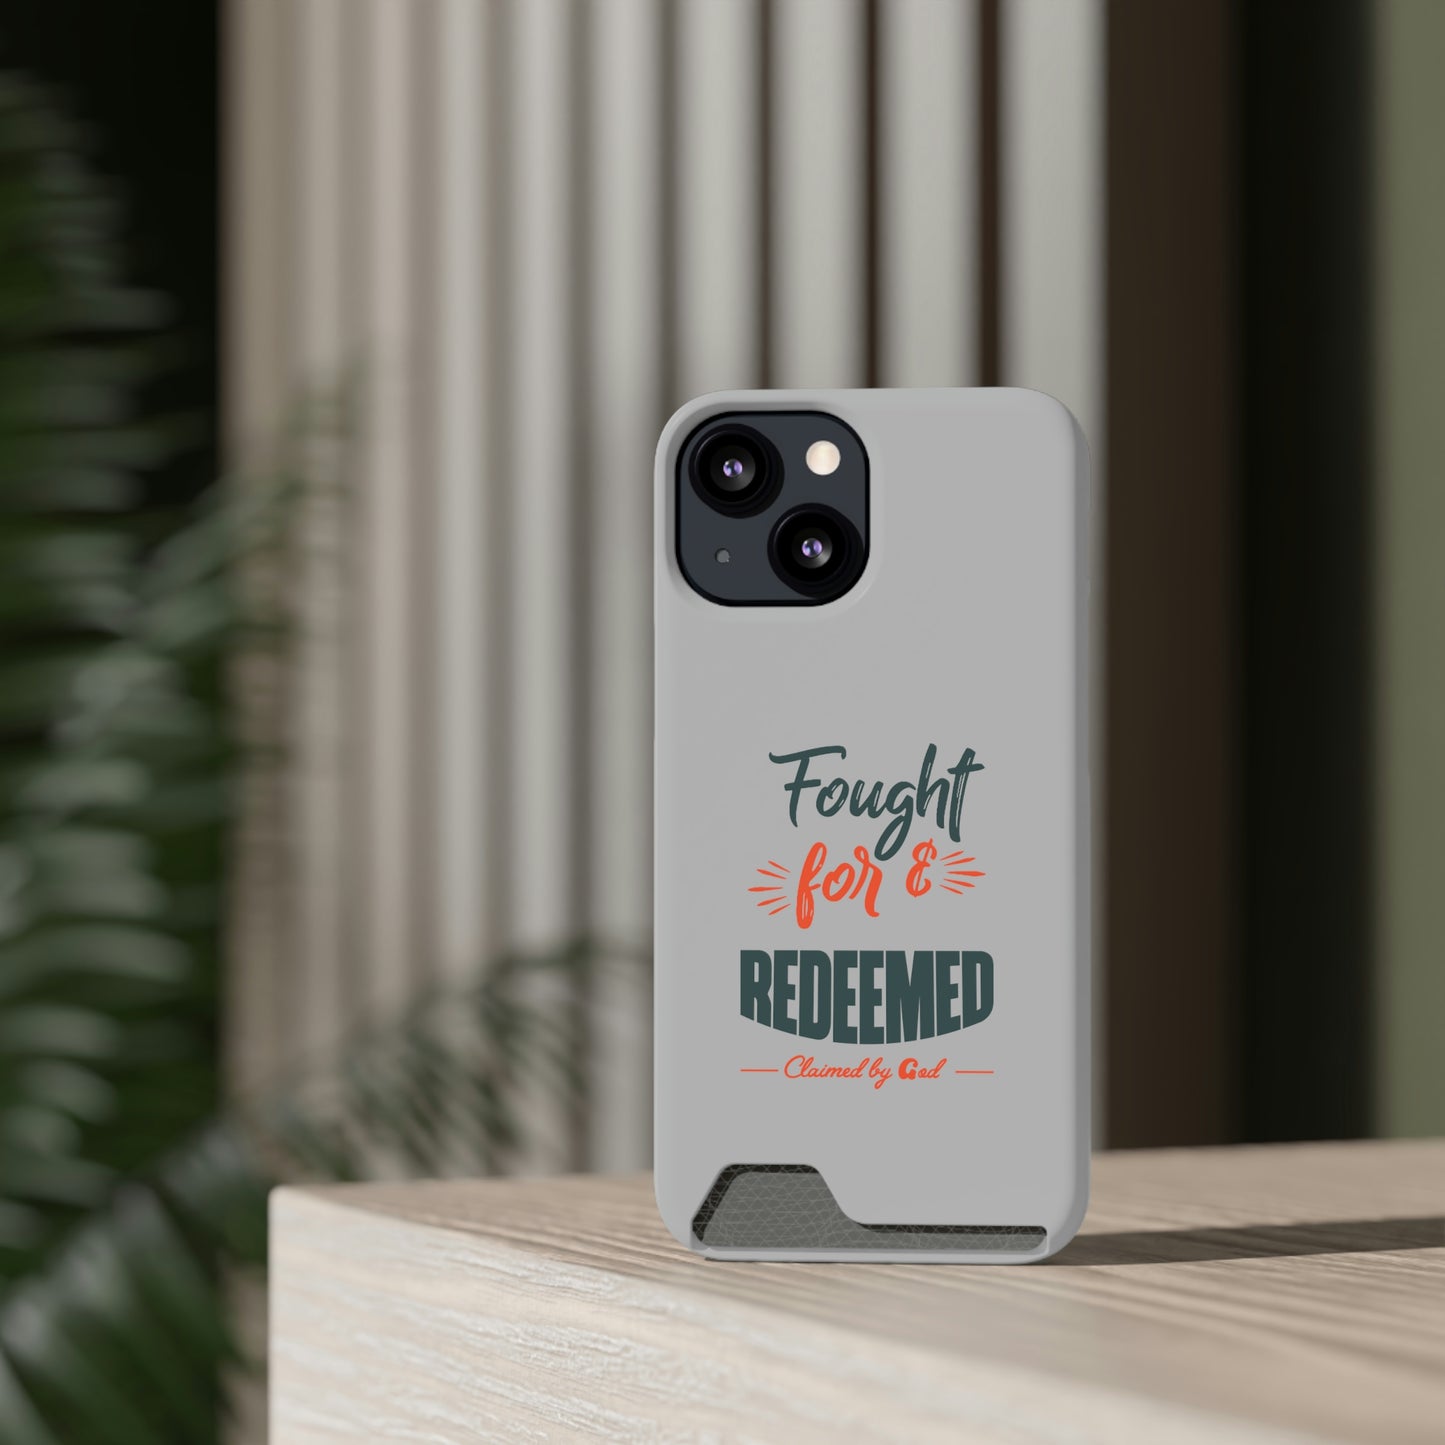 Fought For & Redeemed Phone Case With Card Holder